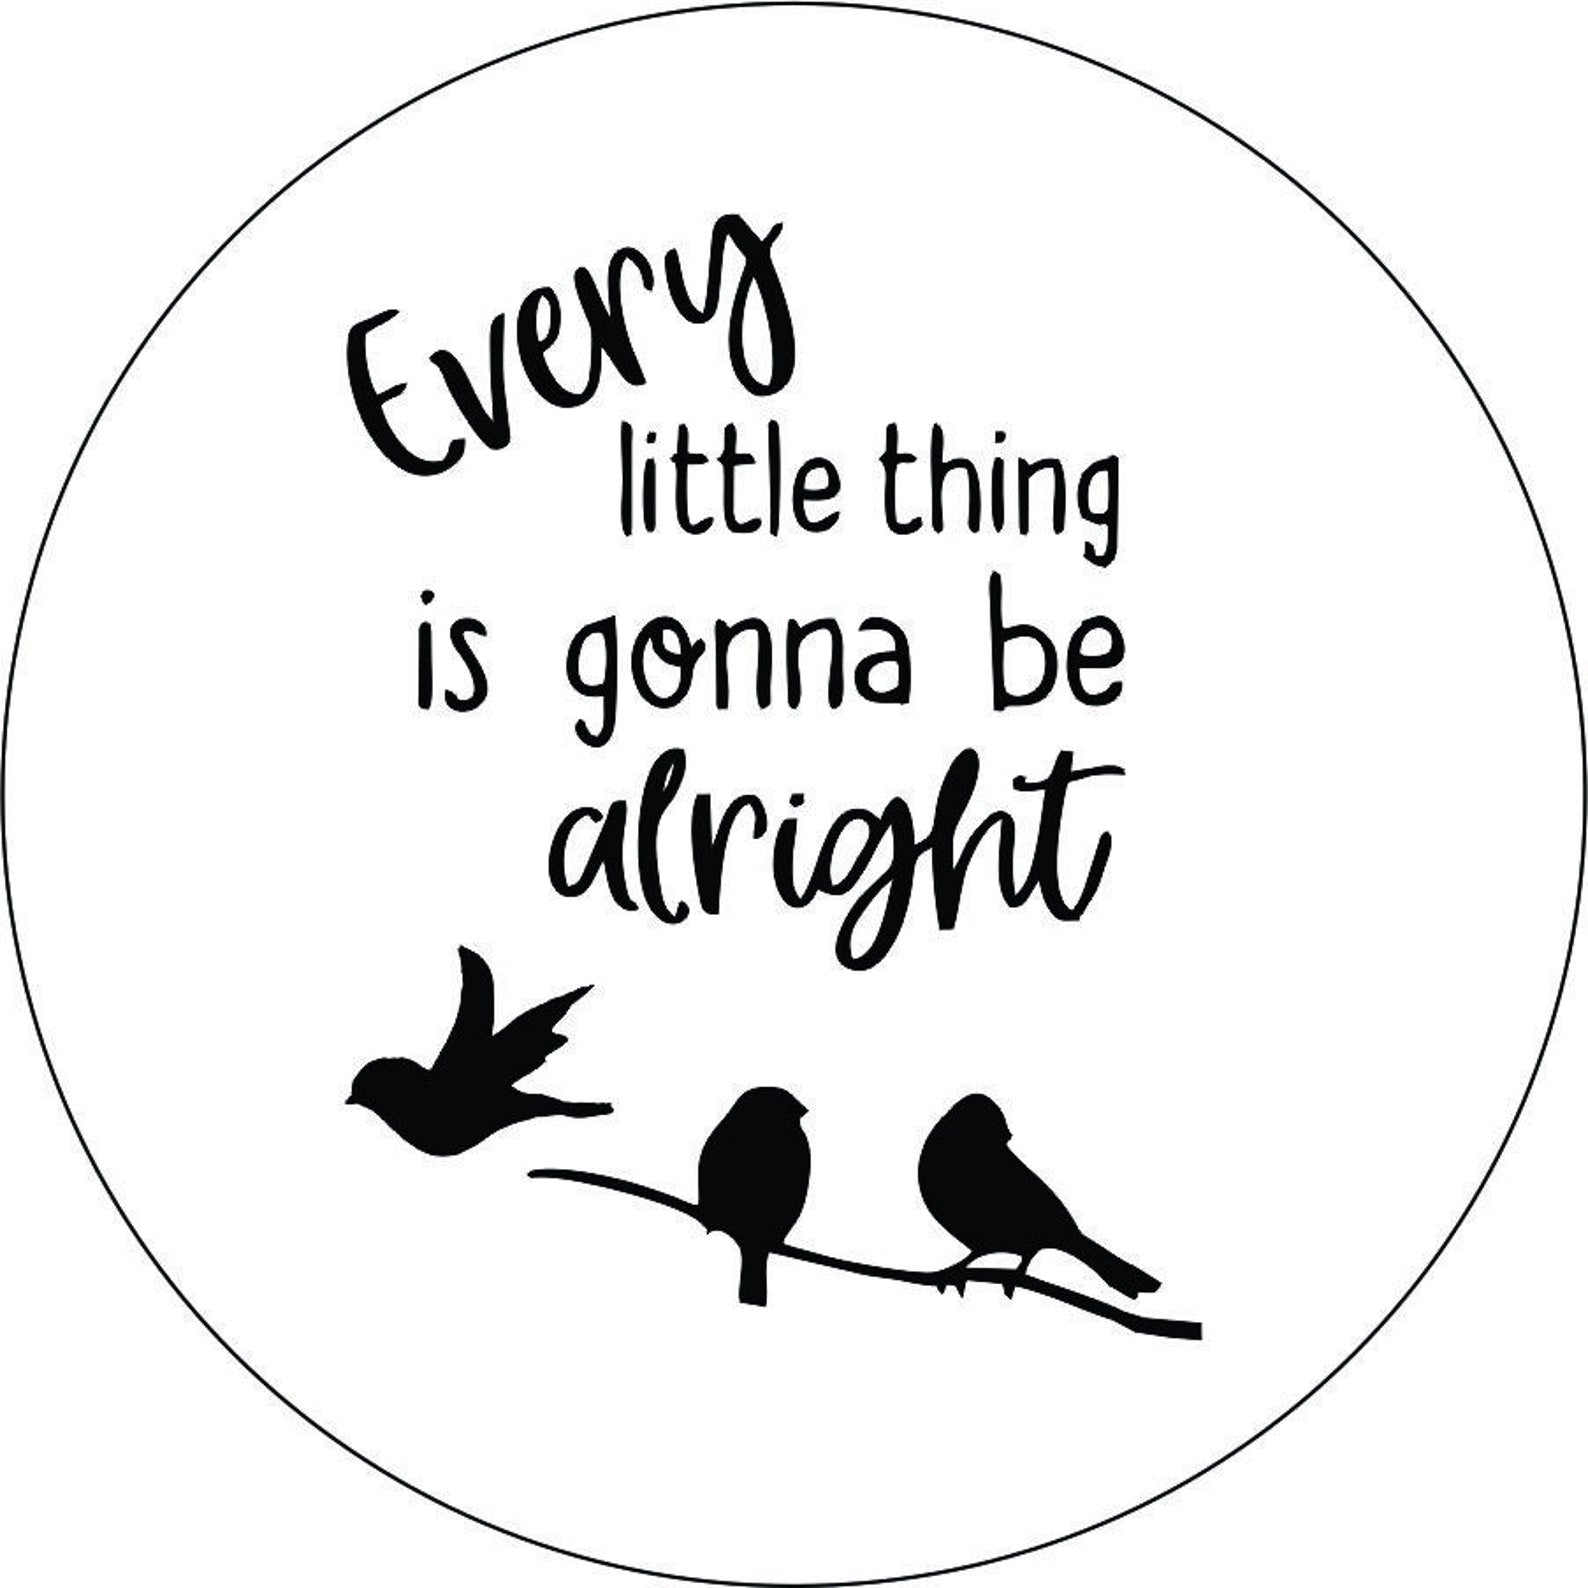 Every Little Thing is Gonna Be Alright + 3 Bird Silhouettes